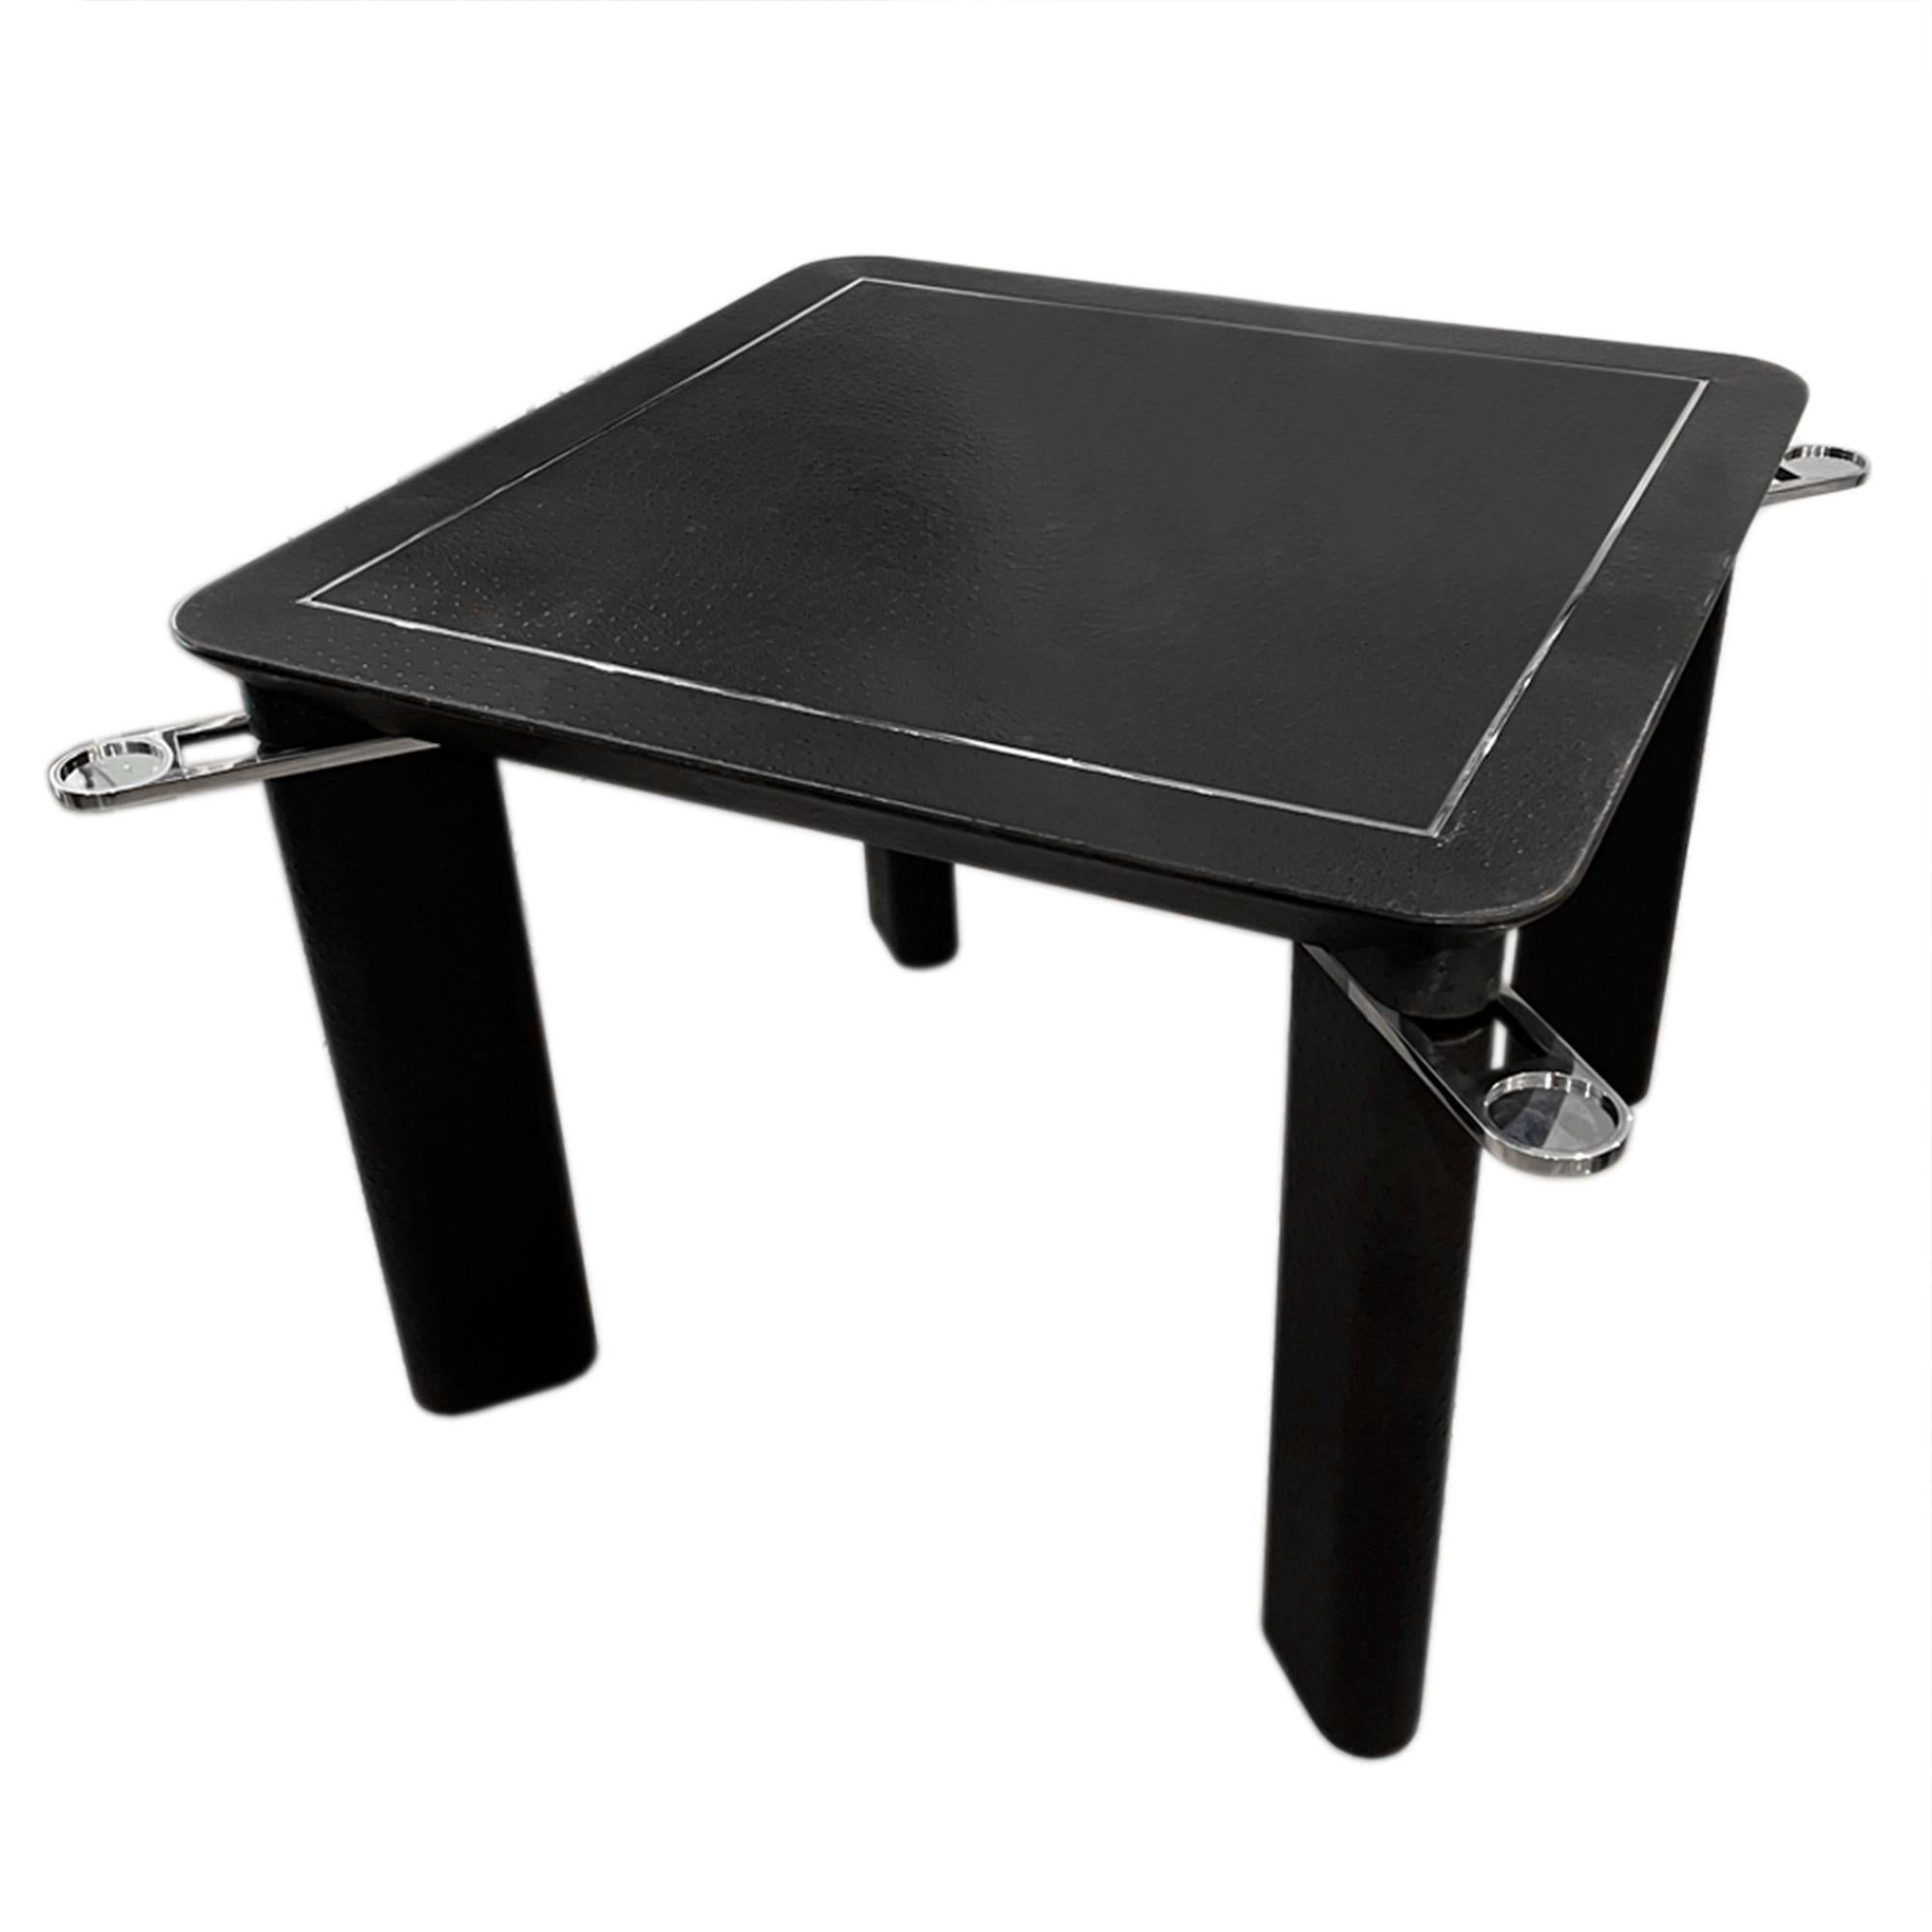 Mid-Century Modern French Ostrich Leather Card Table With Chrome Trim and Drink's Holders For Sale